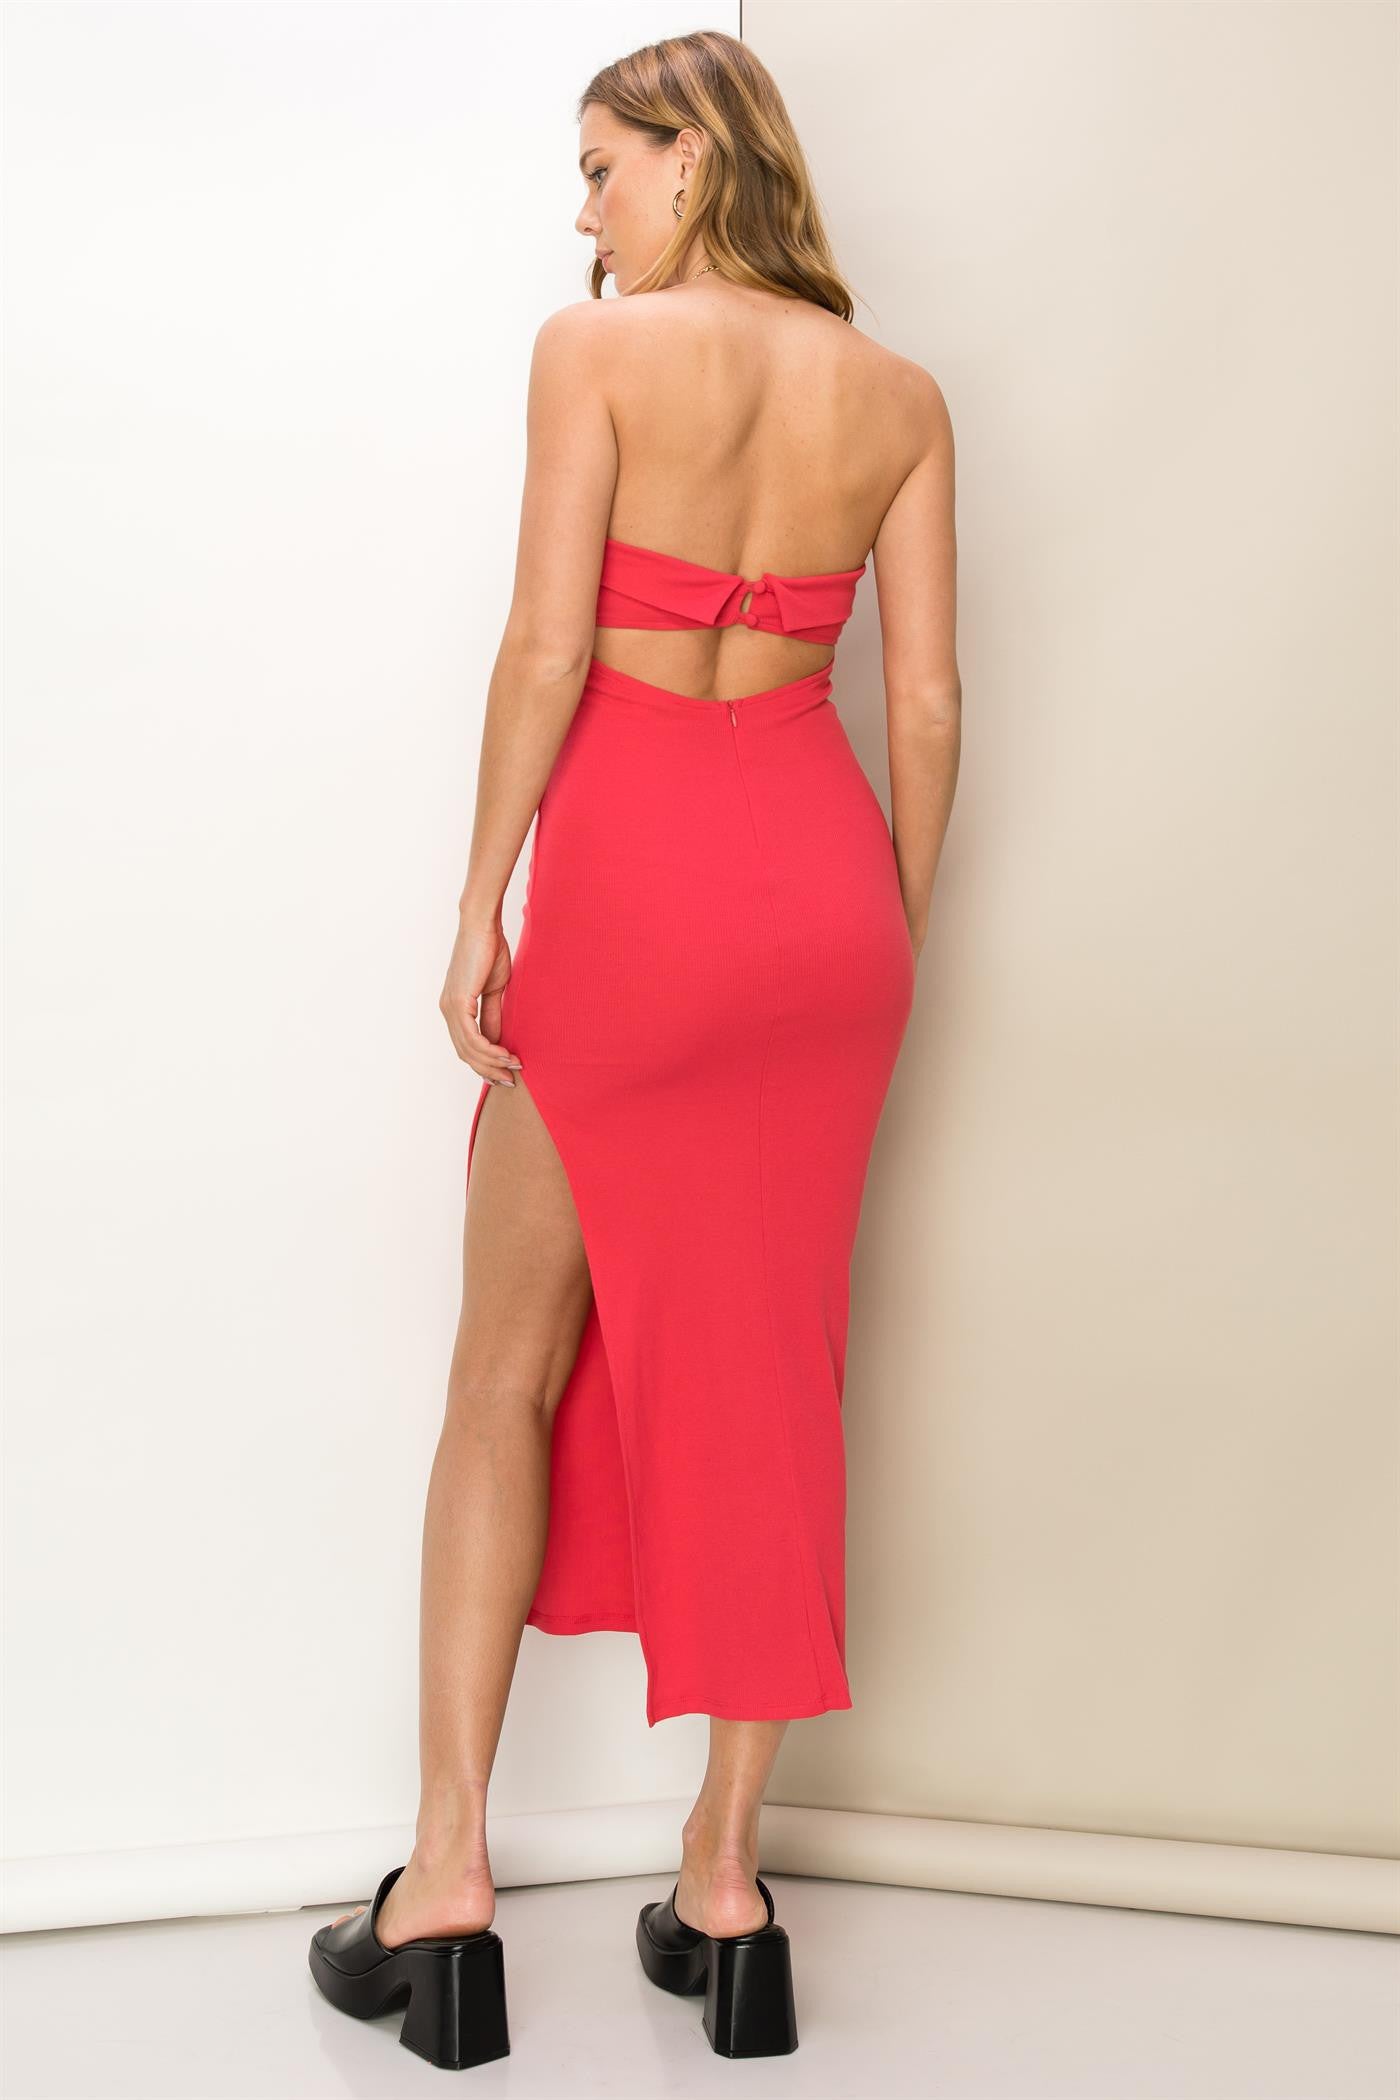 Its A Date Strapless Cutout Midi Dress In Coral Red